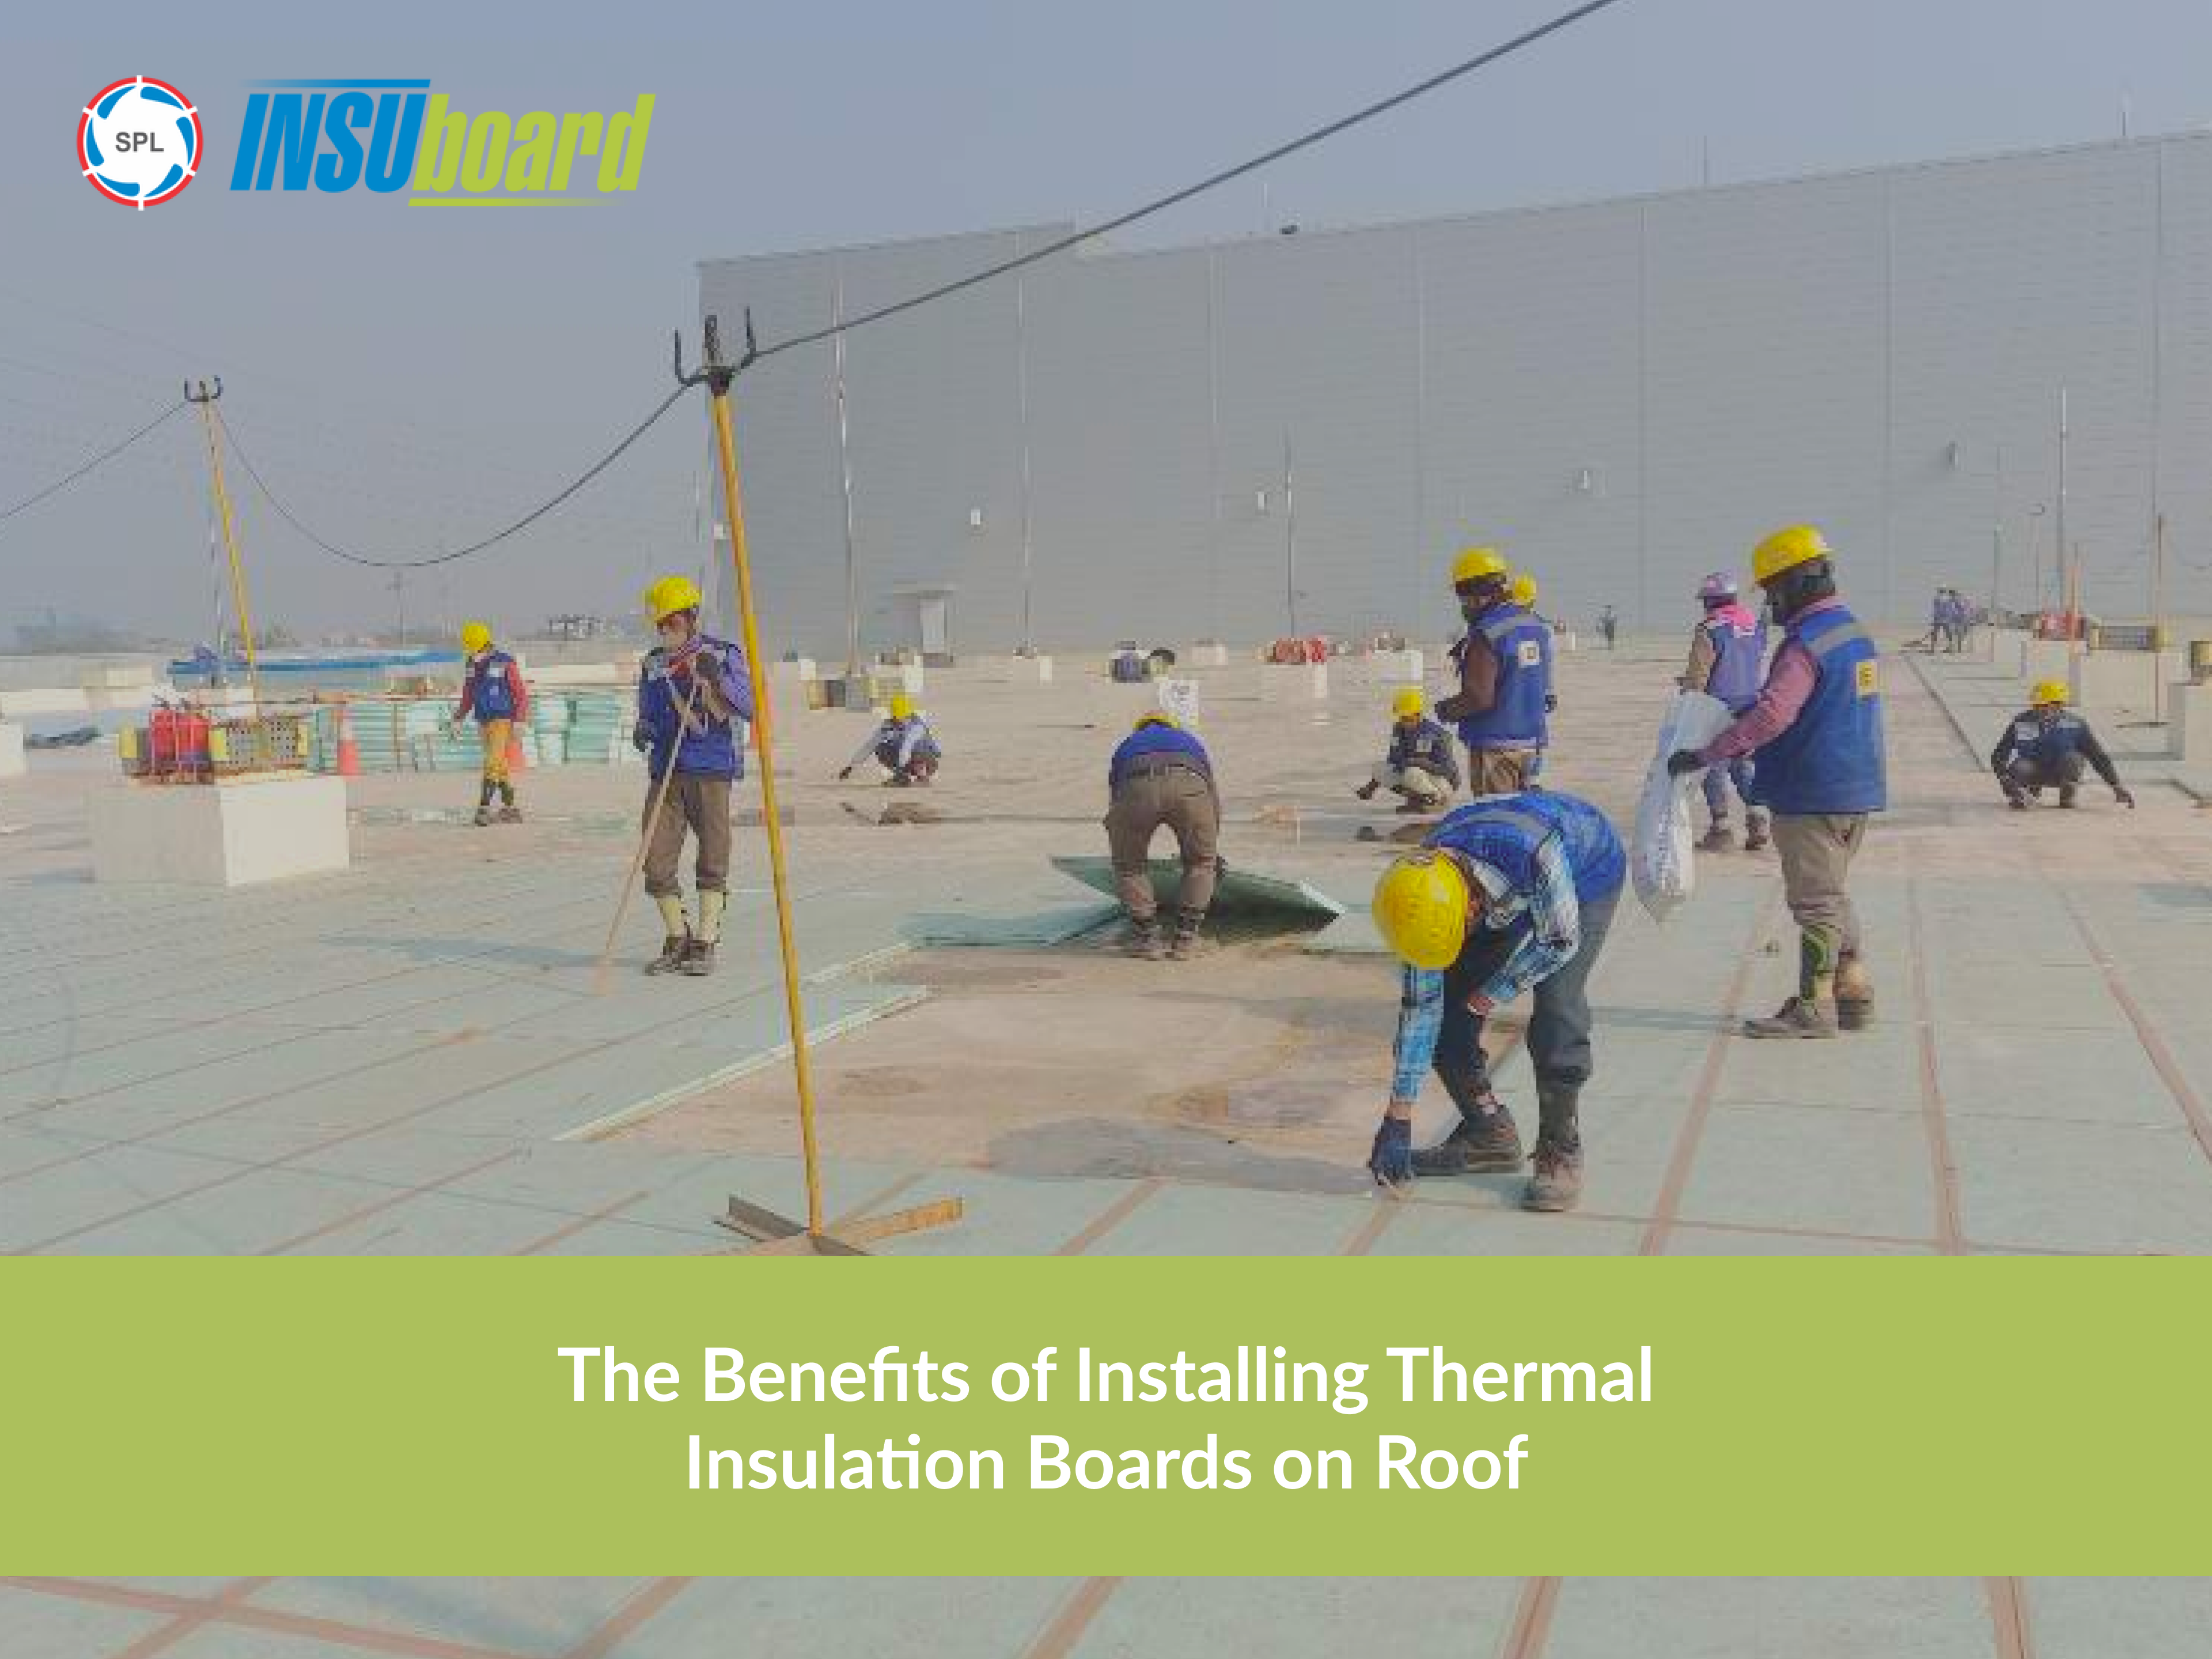 The Benefits of Installing Thermal Insulation Boards on Roof